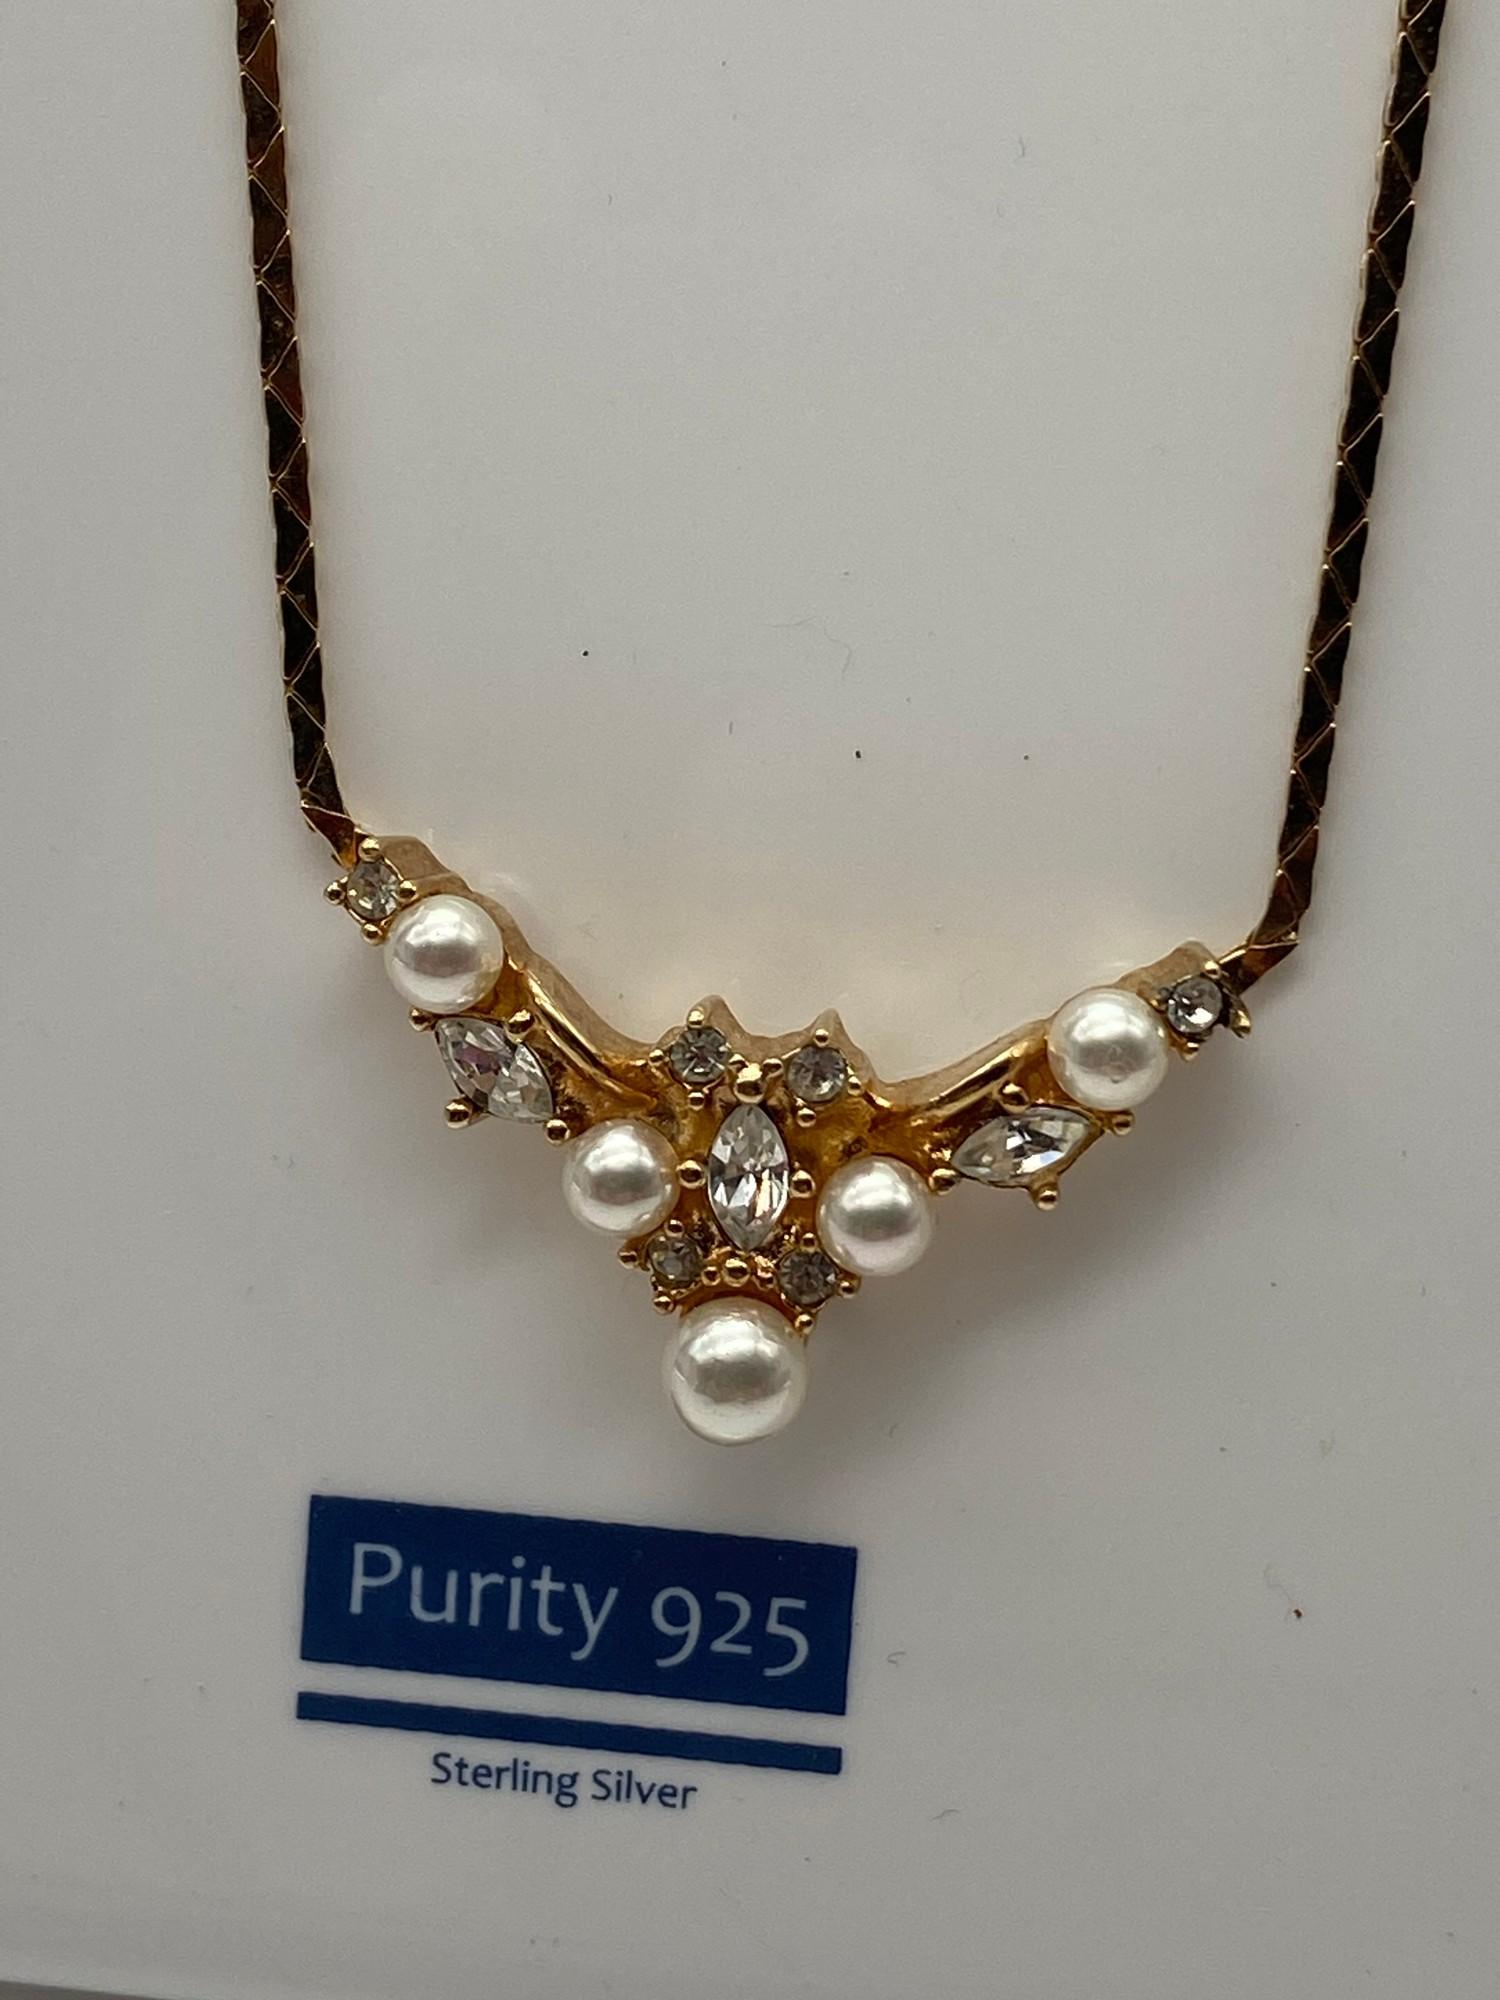 Christian Dior gold plated ladies necklace and ornate pendant designed with pearls and clear stones.